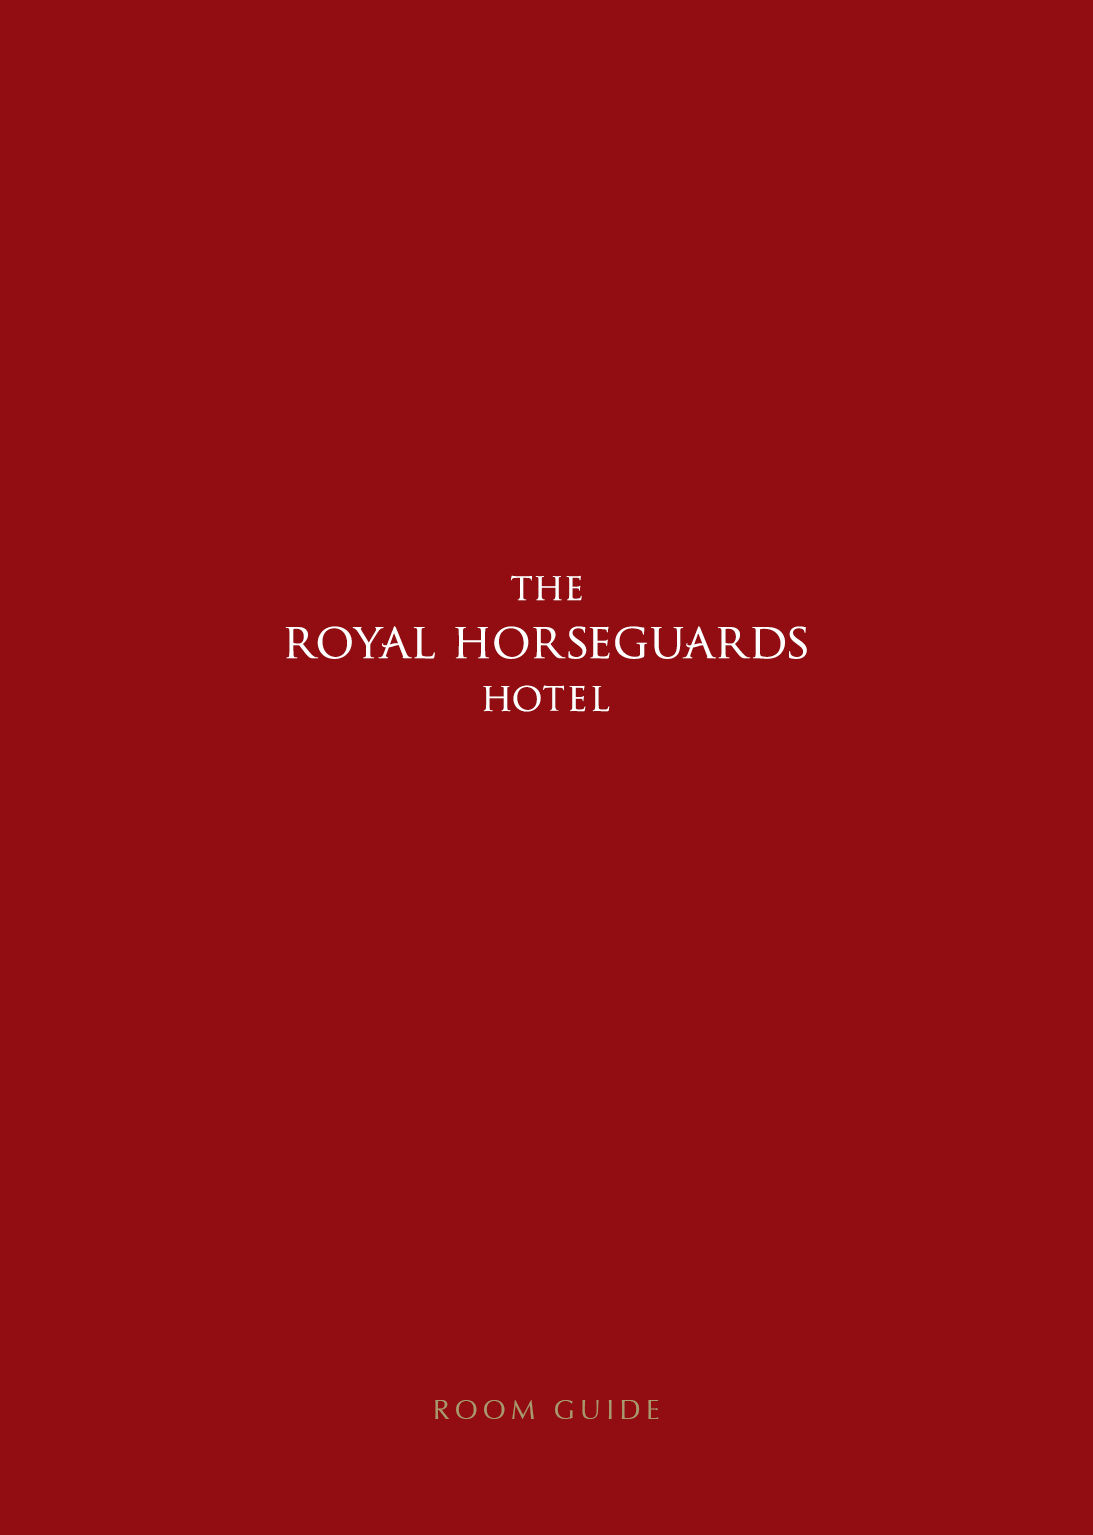 The Royal Horseguards Cover.jpg